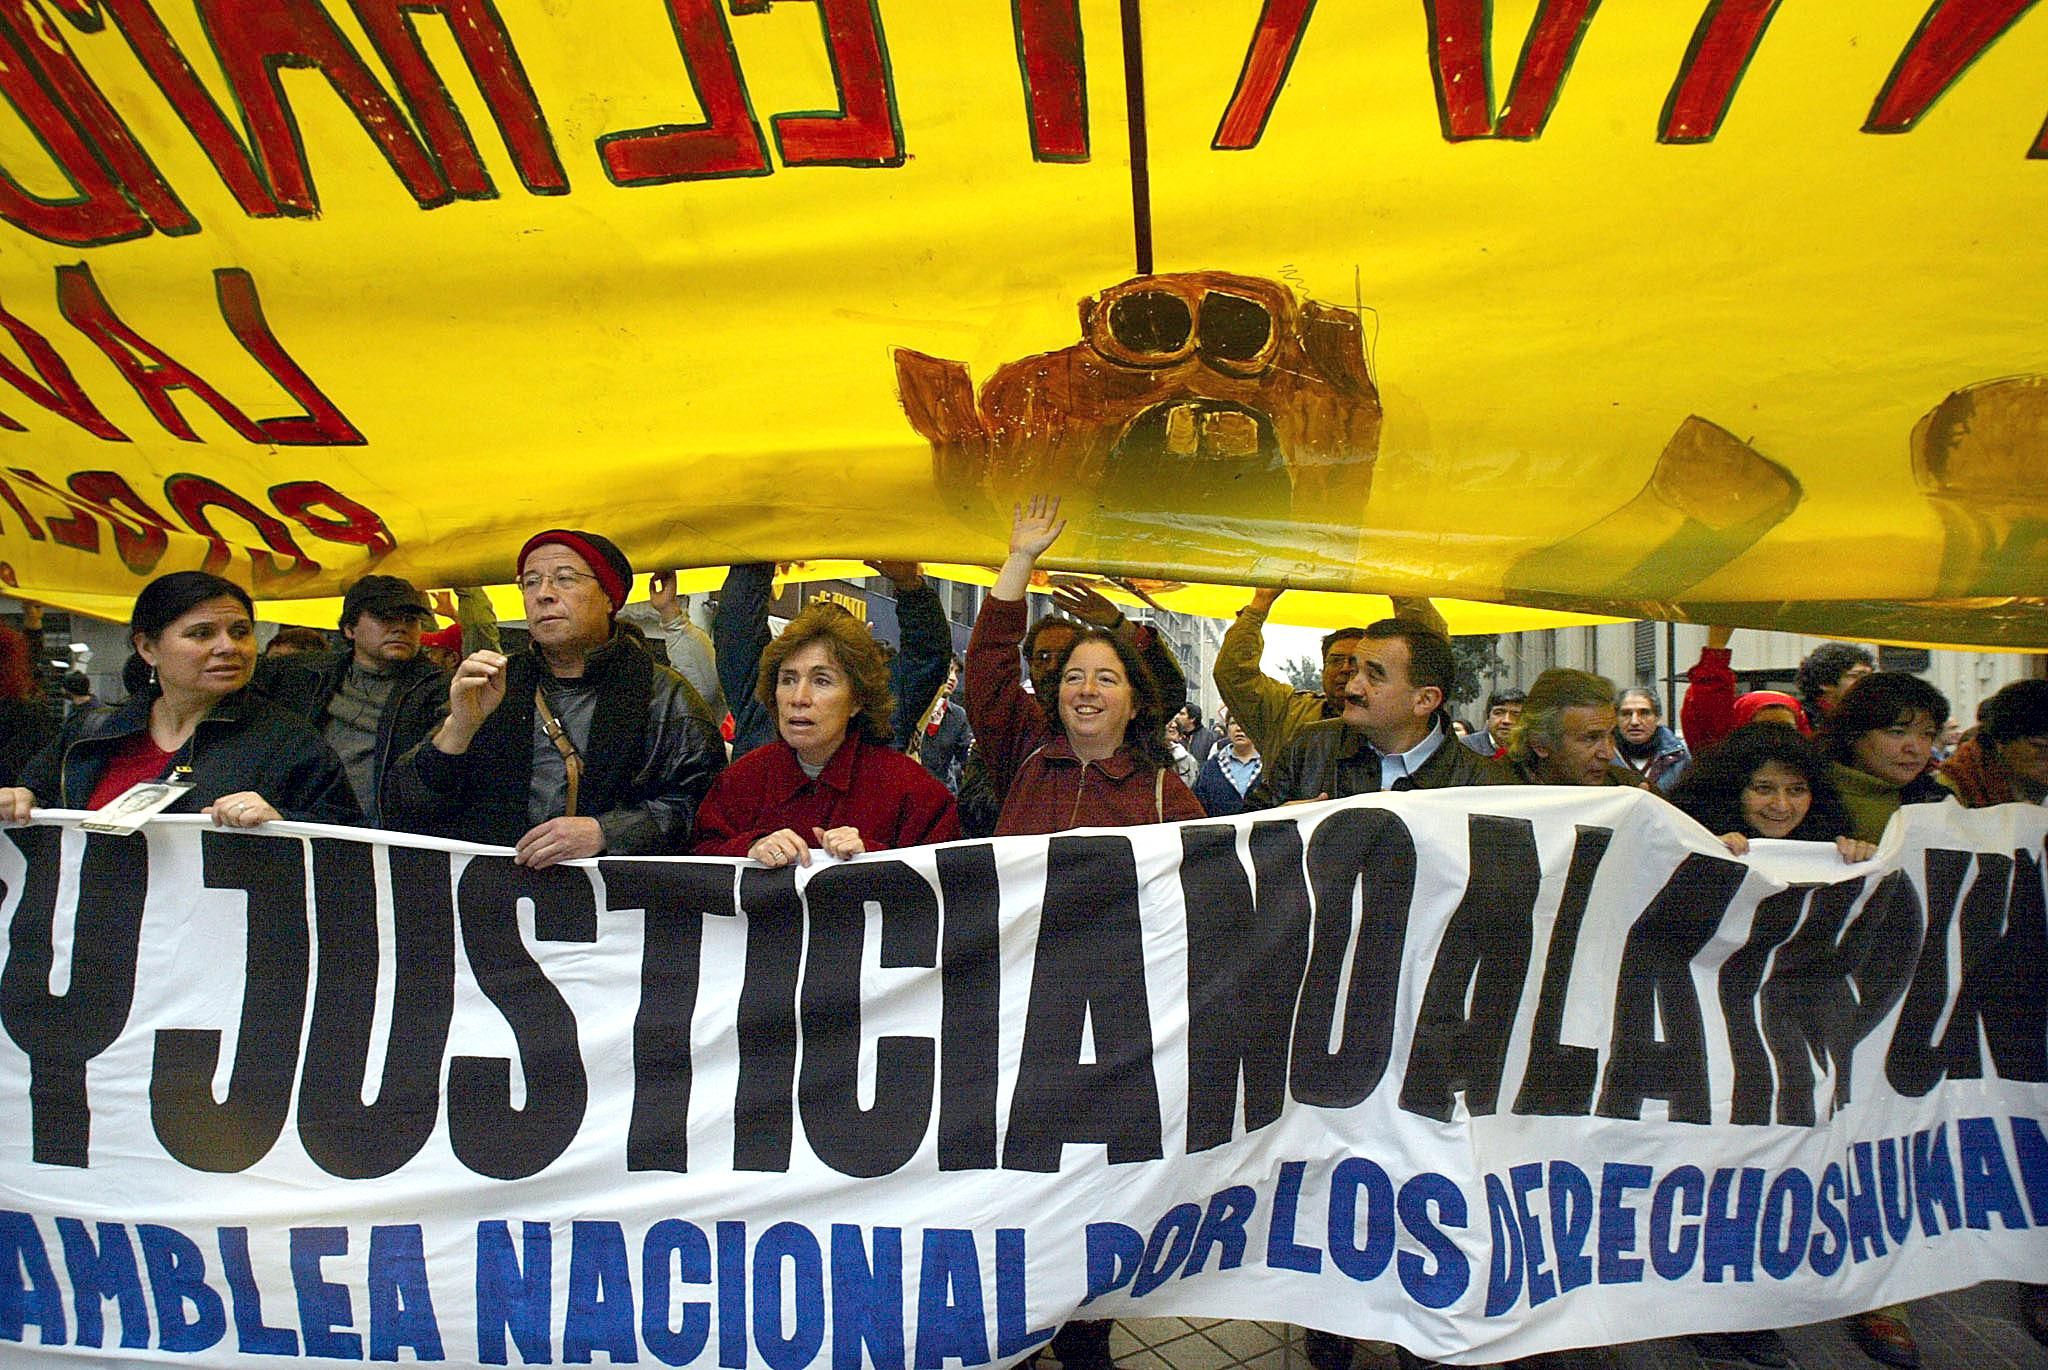 Protesters carry a large white banner in Spanish letters as a larger yellow banner hangs over them in Chile in  2002